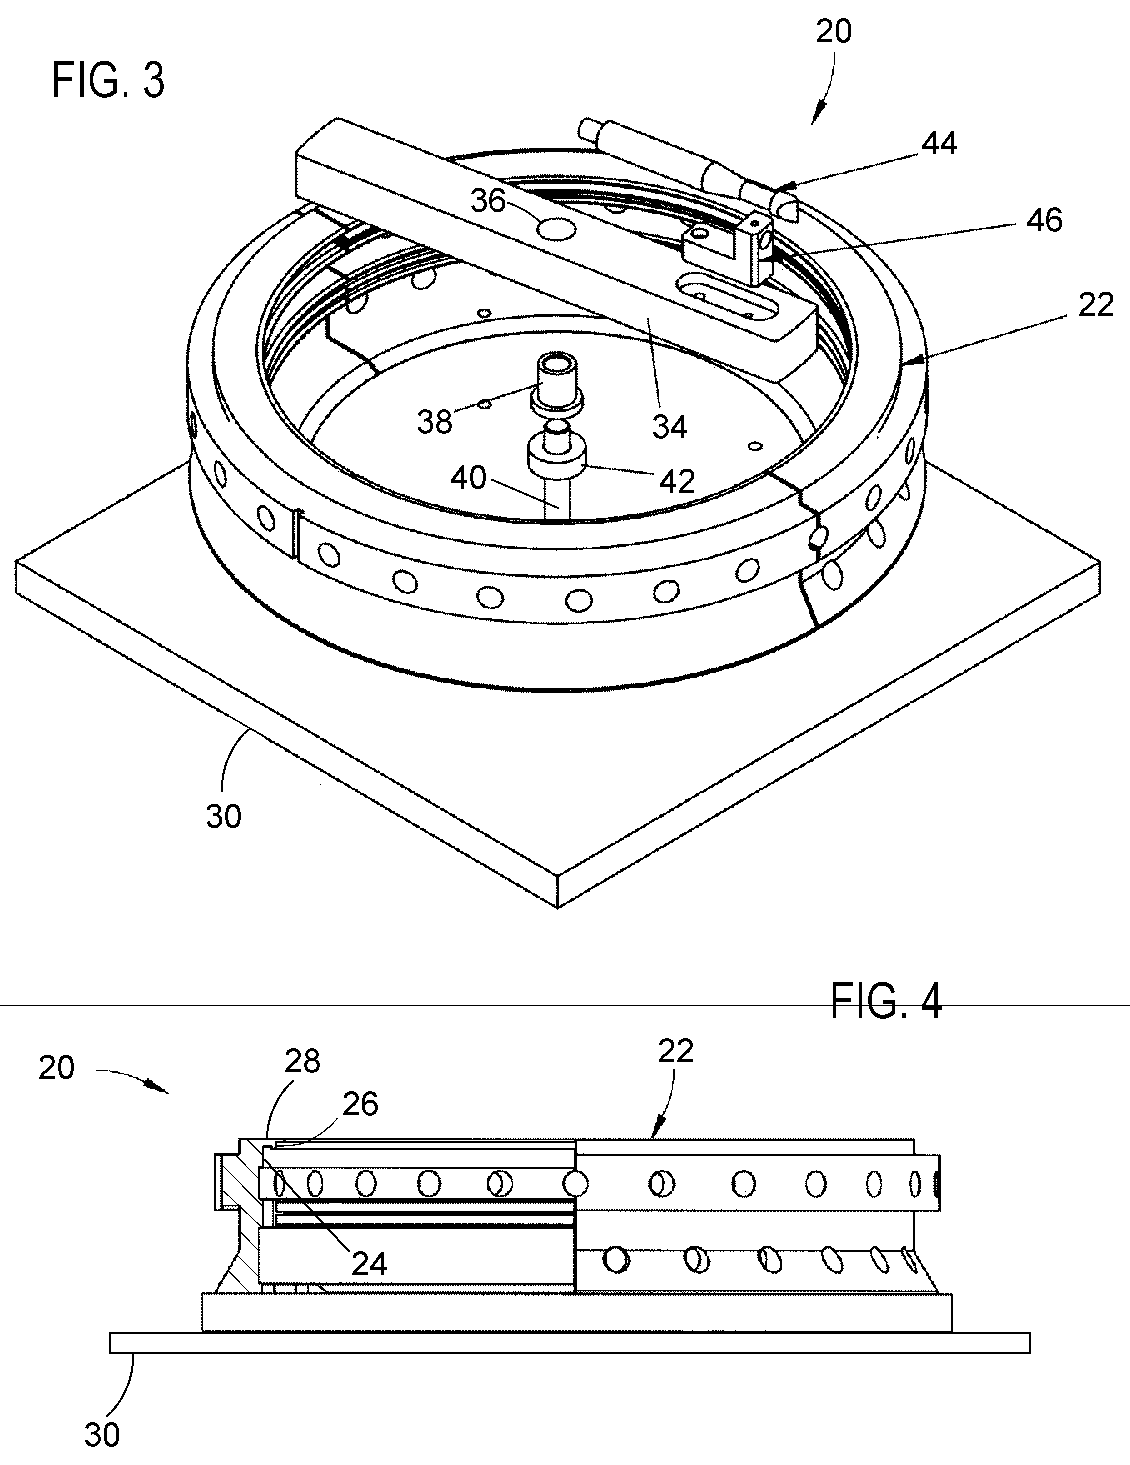 Fixture and inspection method for an annular seal